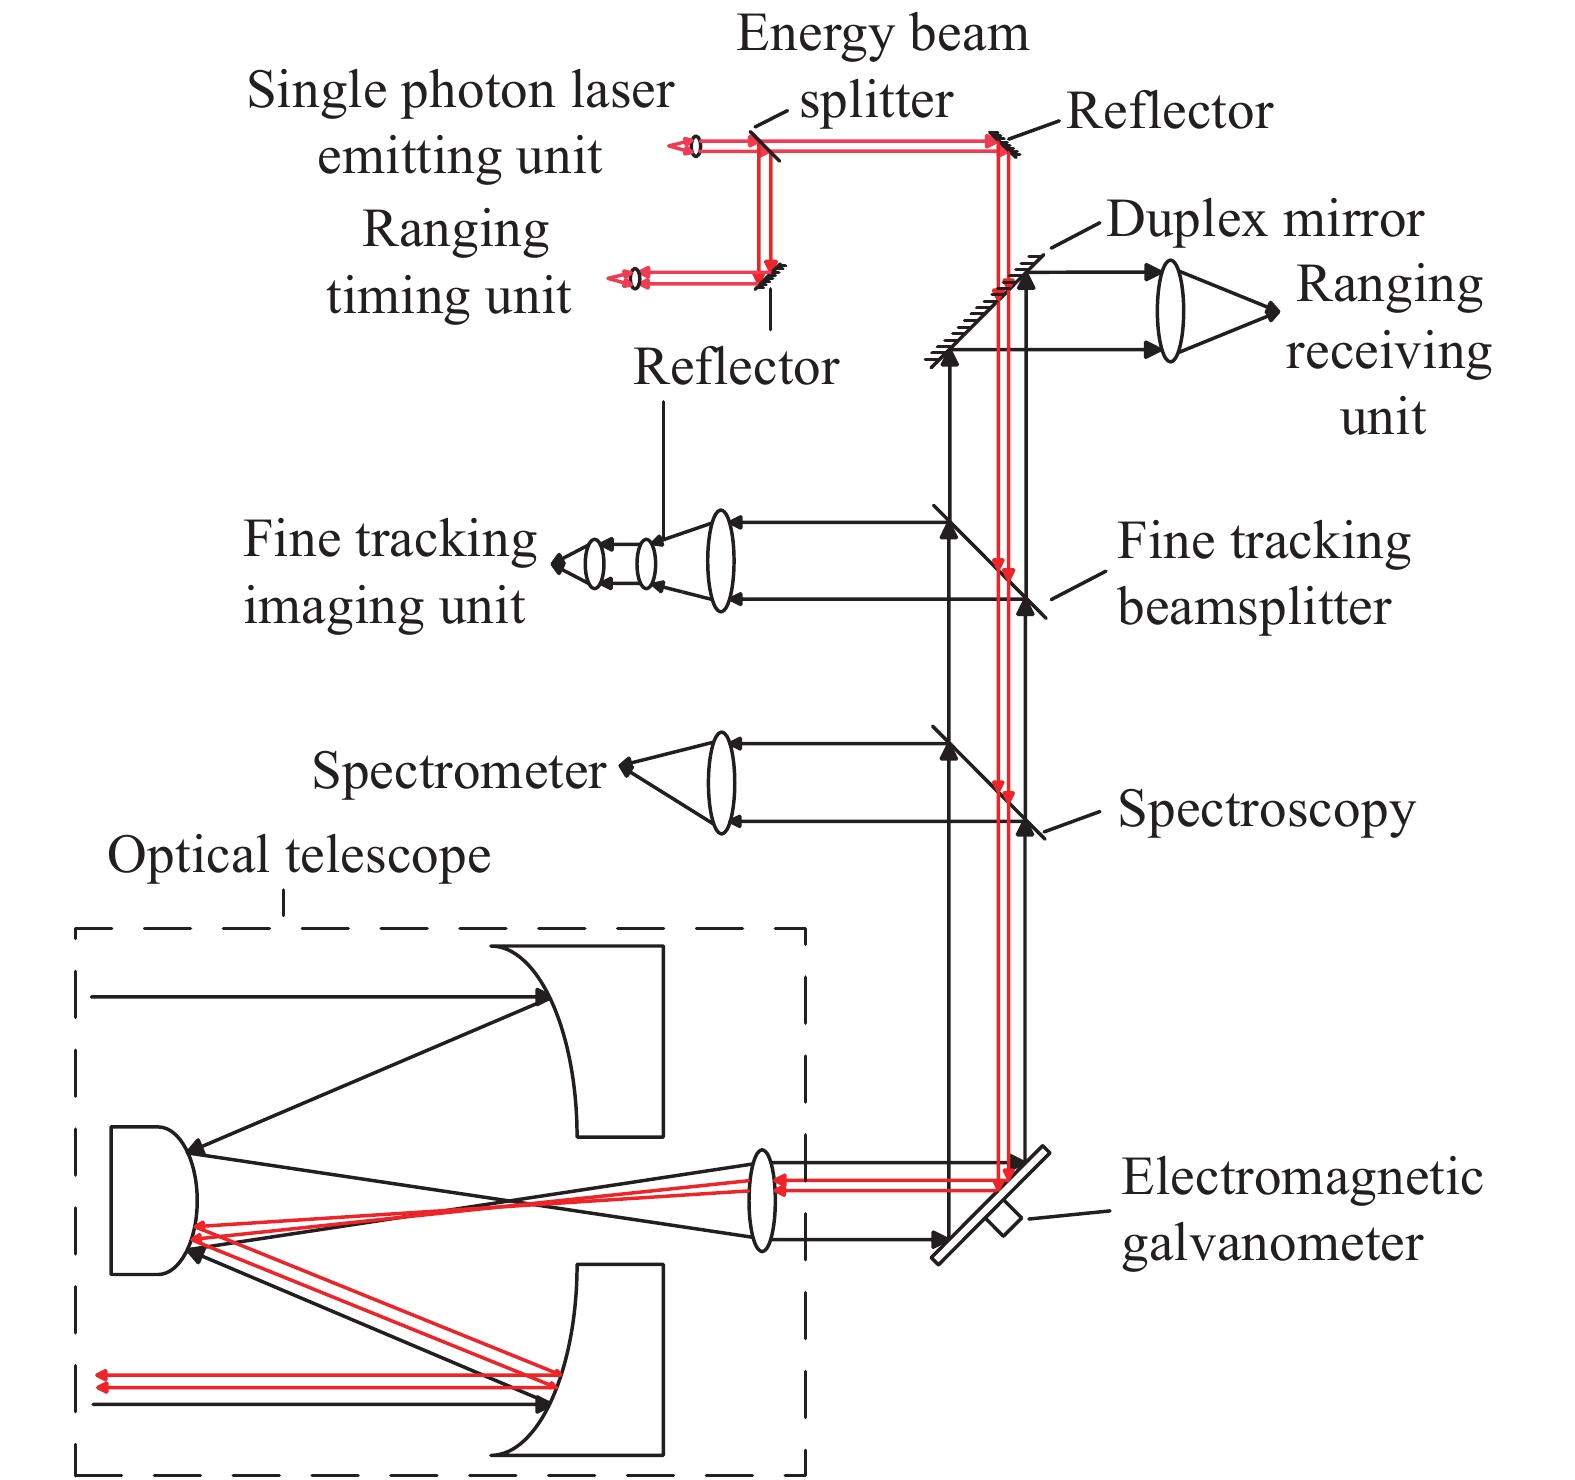 Principle diagram of the optical path of the space debris detection and ranging composite system